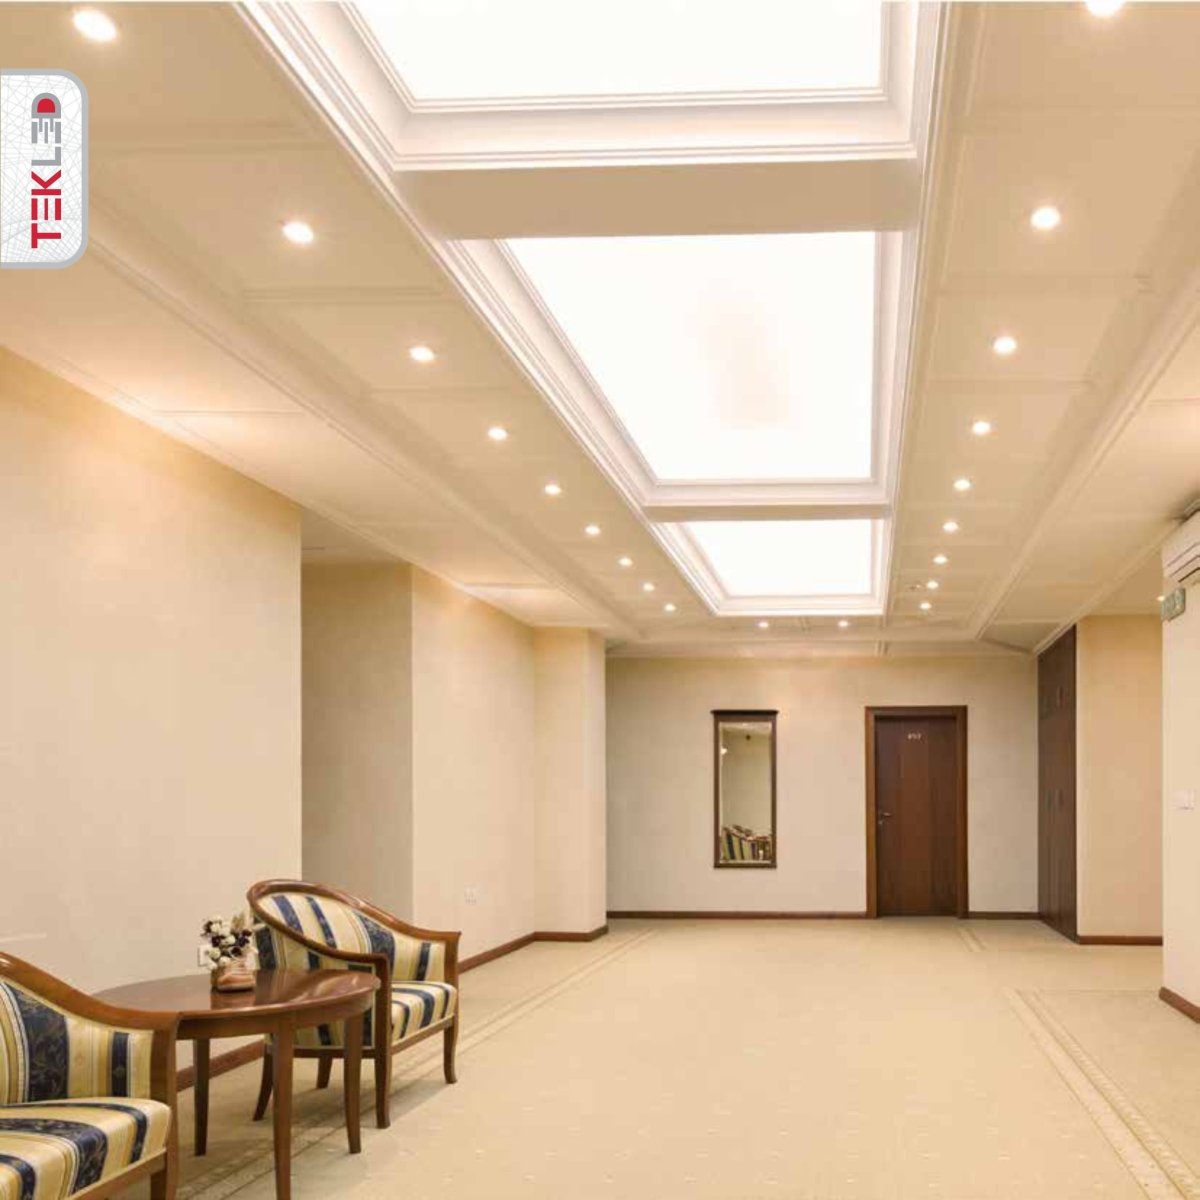 Downlight Led Round Slim Panel Light 18W 3000K Warm White D220Mm in indoor setting waiting room